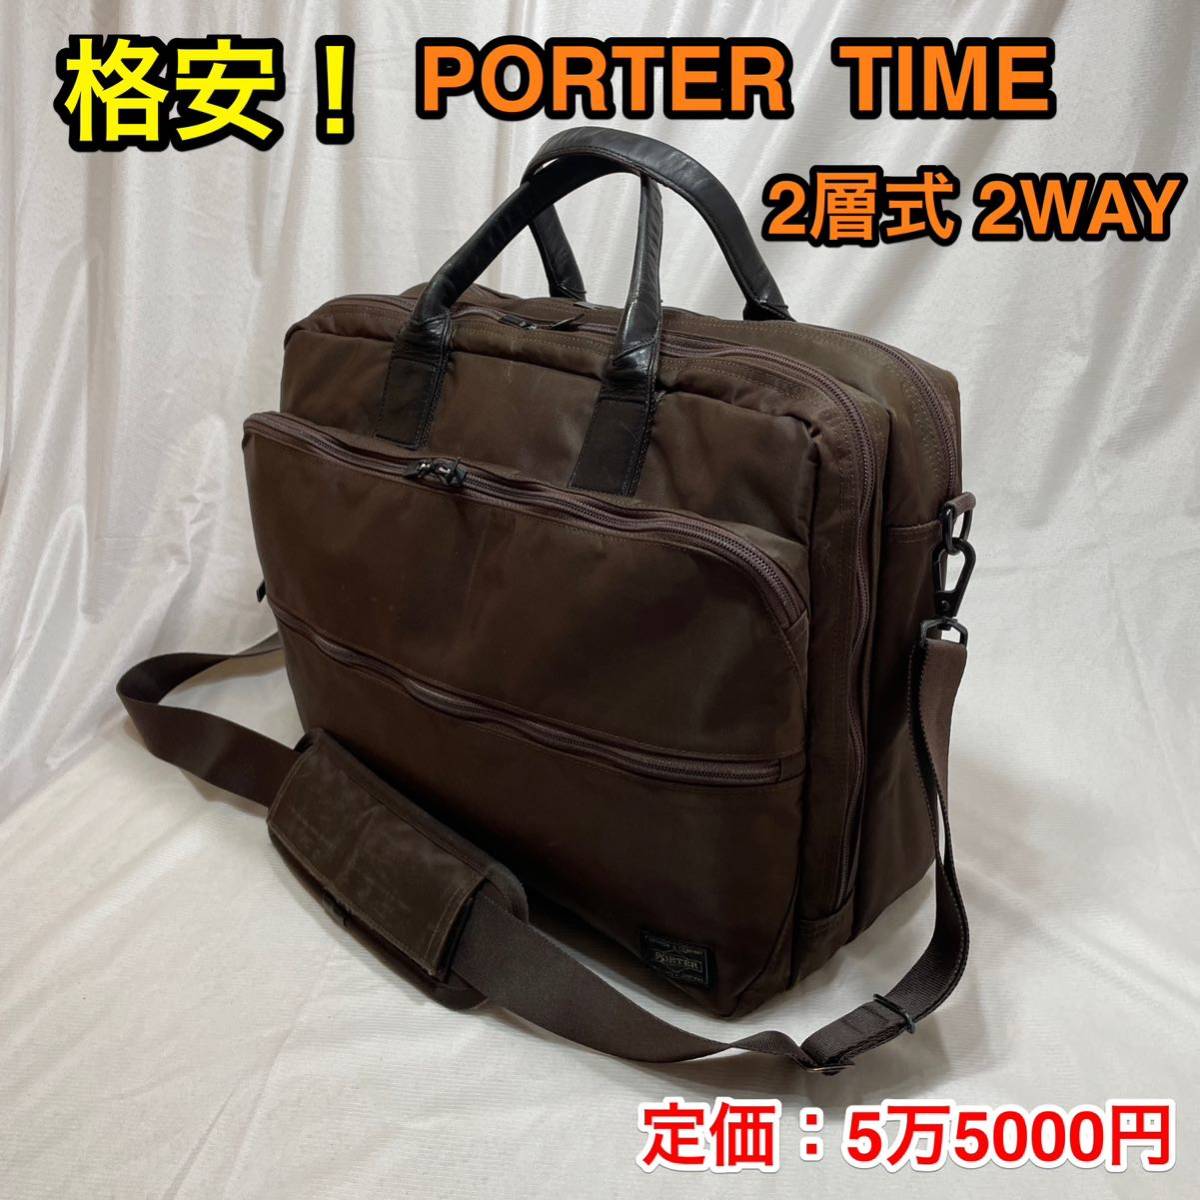 [ cheap!] Yoshida bag PORTER TIME briefcase * Porter time 2 layer type 2way business bag *PC iPad storage Carry on possibility *655-06167